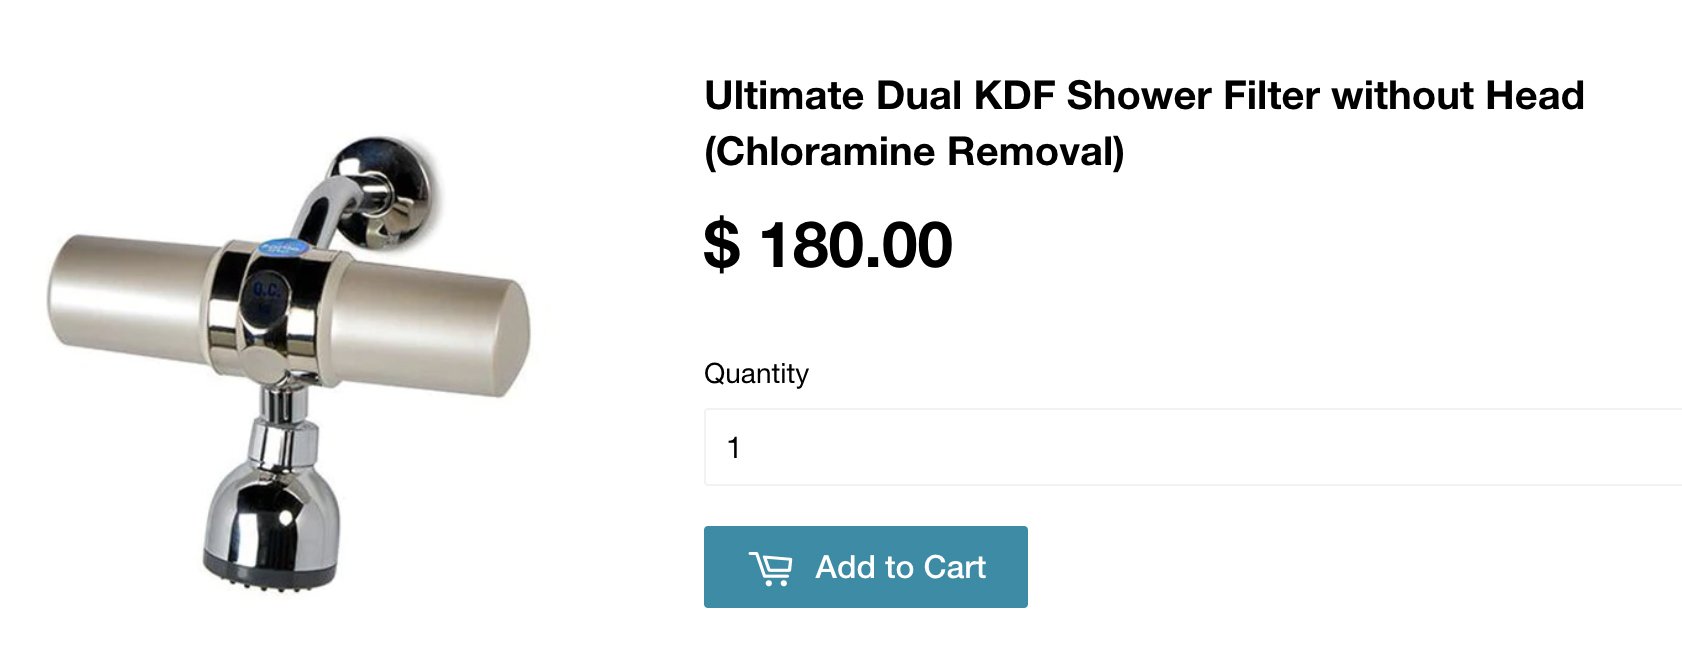 Ultimate Dual KDF Shower Filter without Head (Chloramine Removal)